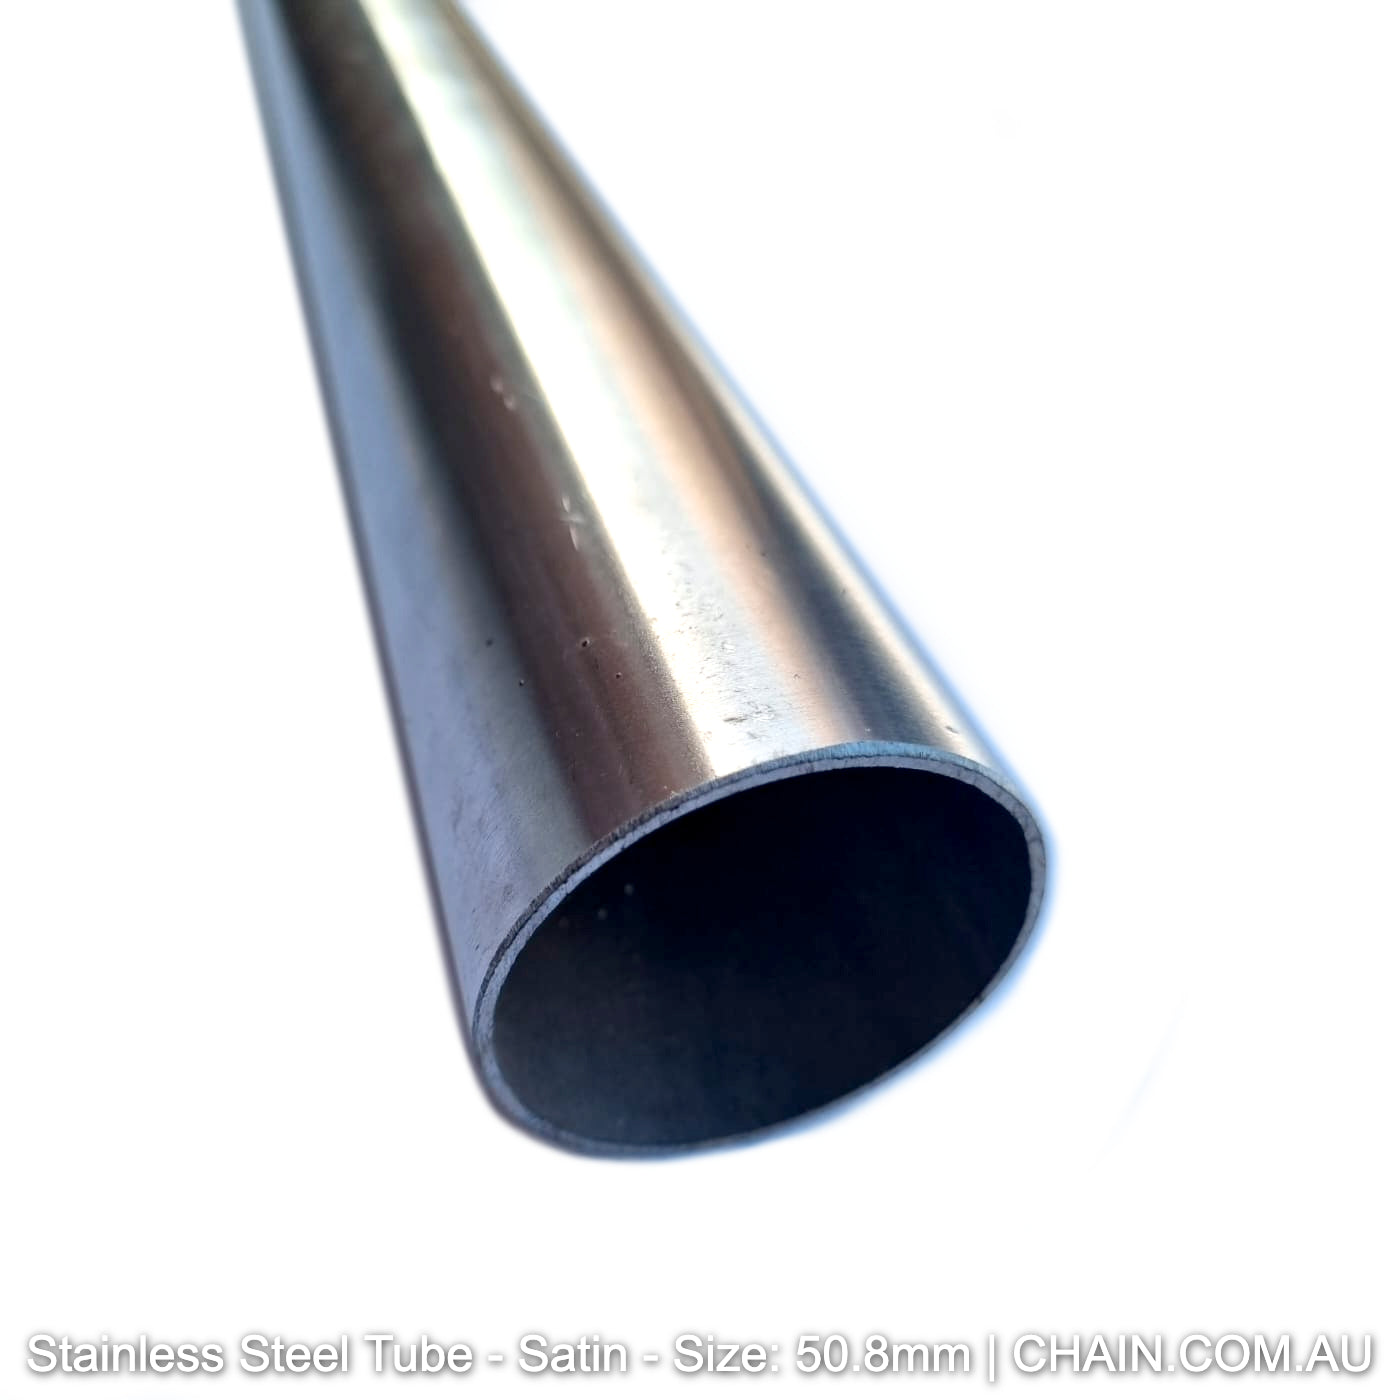 Stainless steel tube in a satin finish. Size: 50.8mm outside diameter. Thickness: 1.6mm. Material: Type 316 or 304 Stainless Steel. Australia wide shipping & Melbourne pick up.